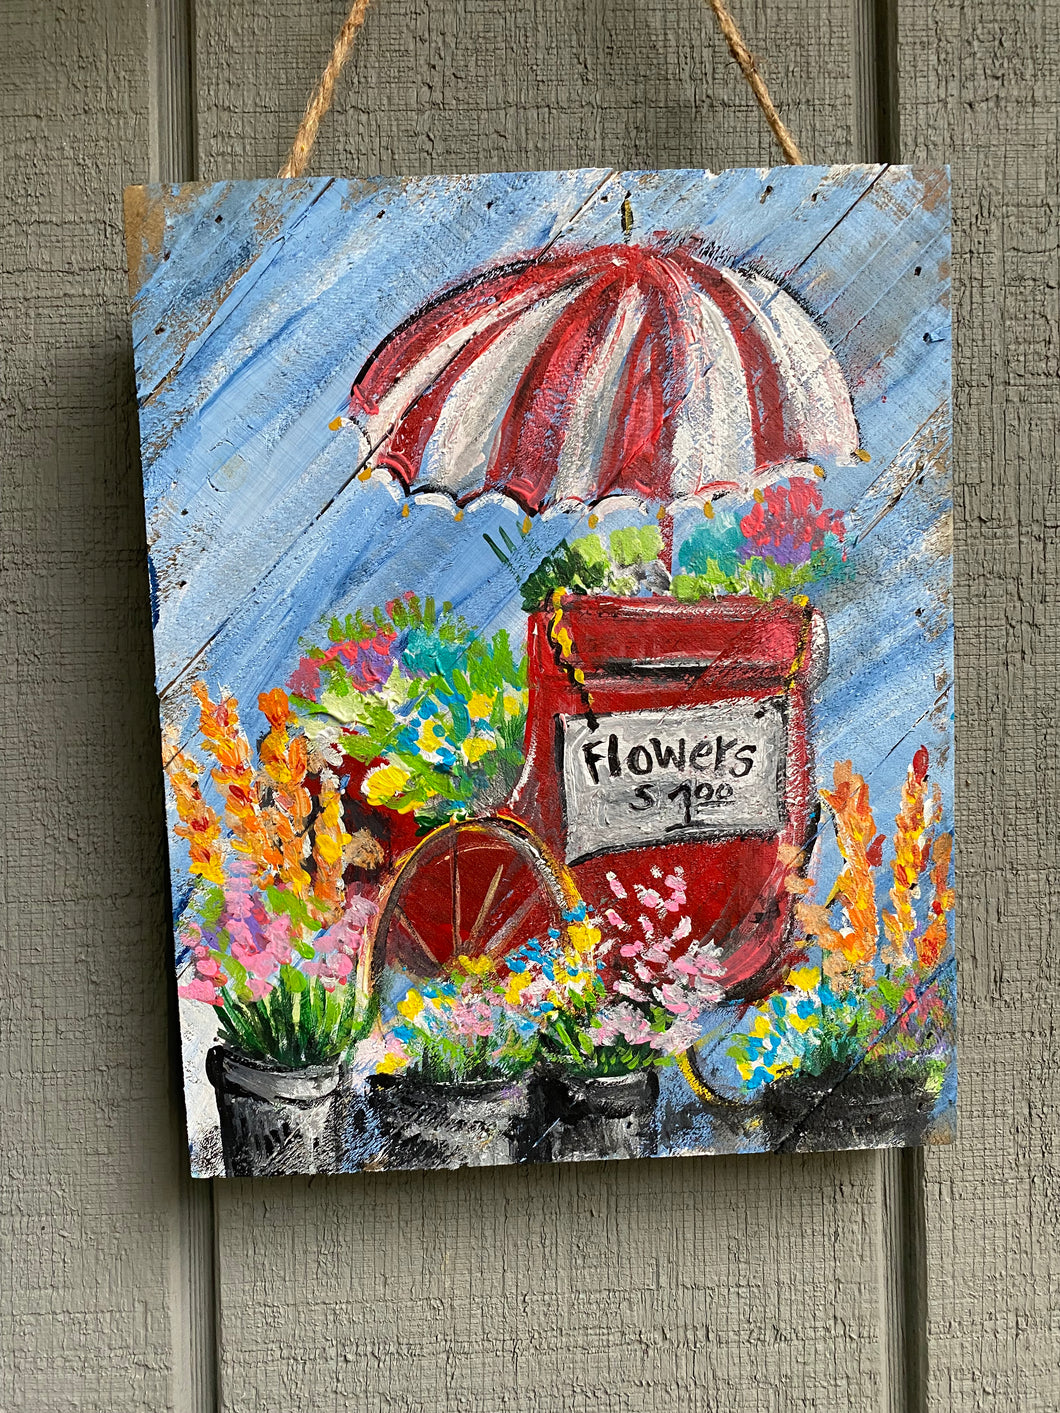 Flowers for Sale - Hand-painted Wooden Square Pallet Wood Wall Decor